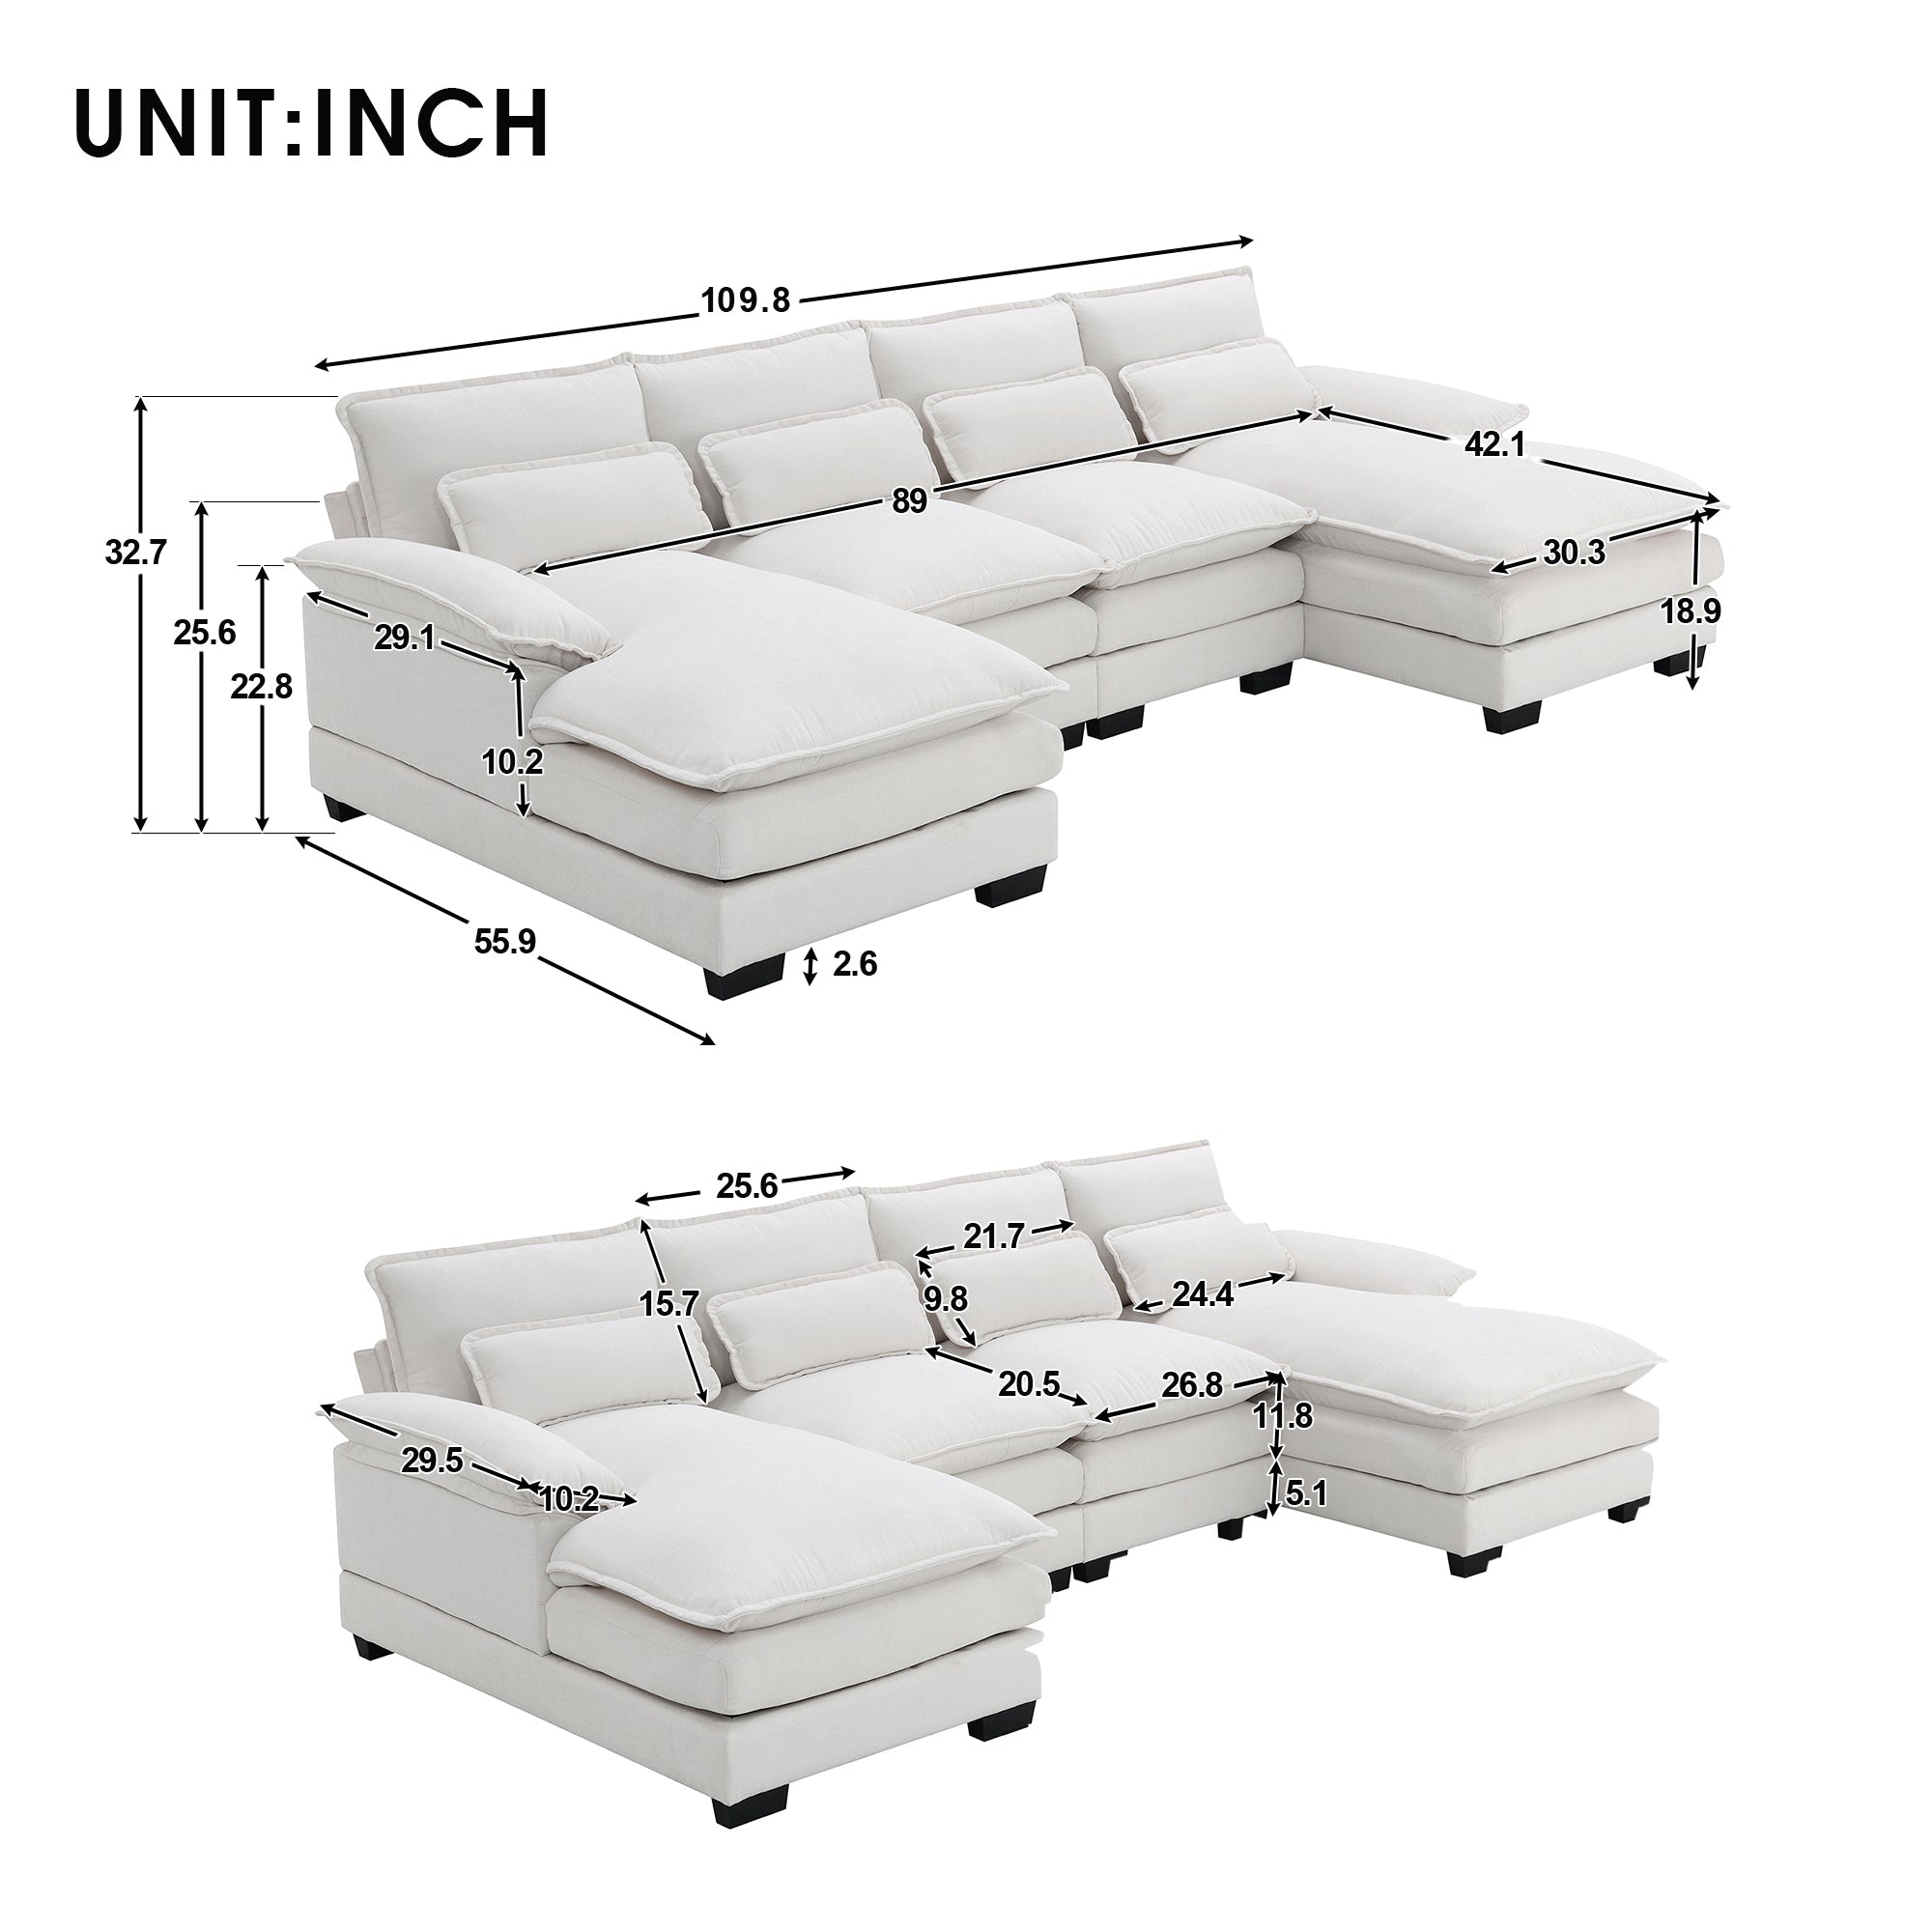 White U-Shaped Sectional Sofa - Plush Comfort in Chenille-Stationary Sectionals-American Furniture Outlet